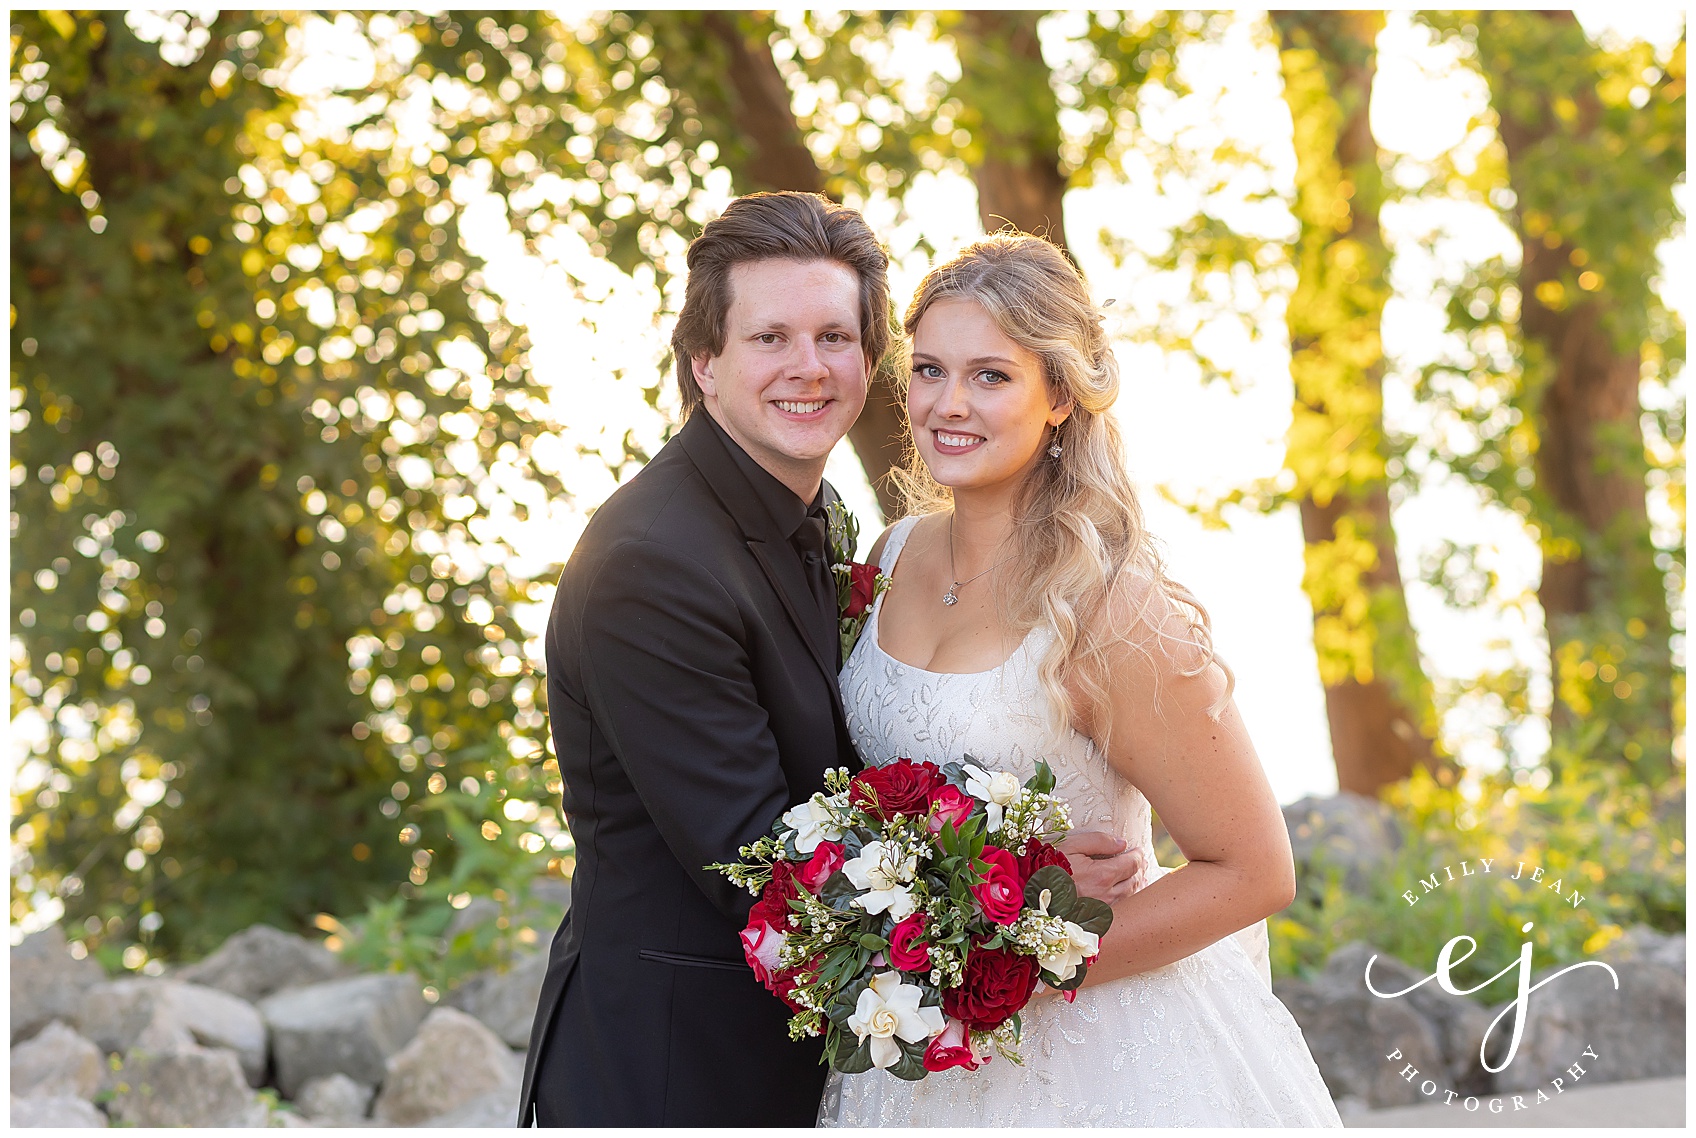 Riding room, camera, smiling classic elegant outdoor summer wedding at the waterfront